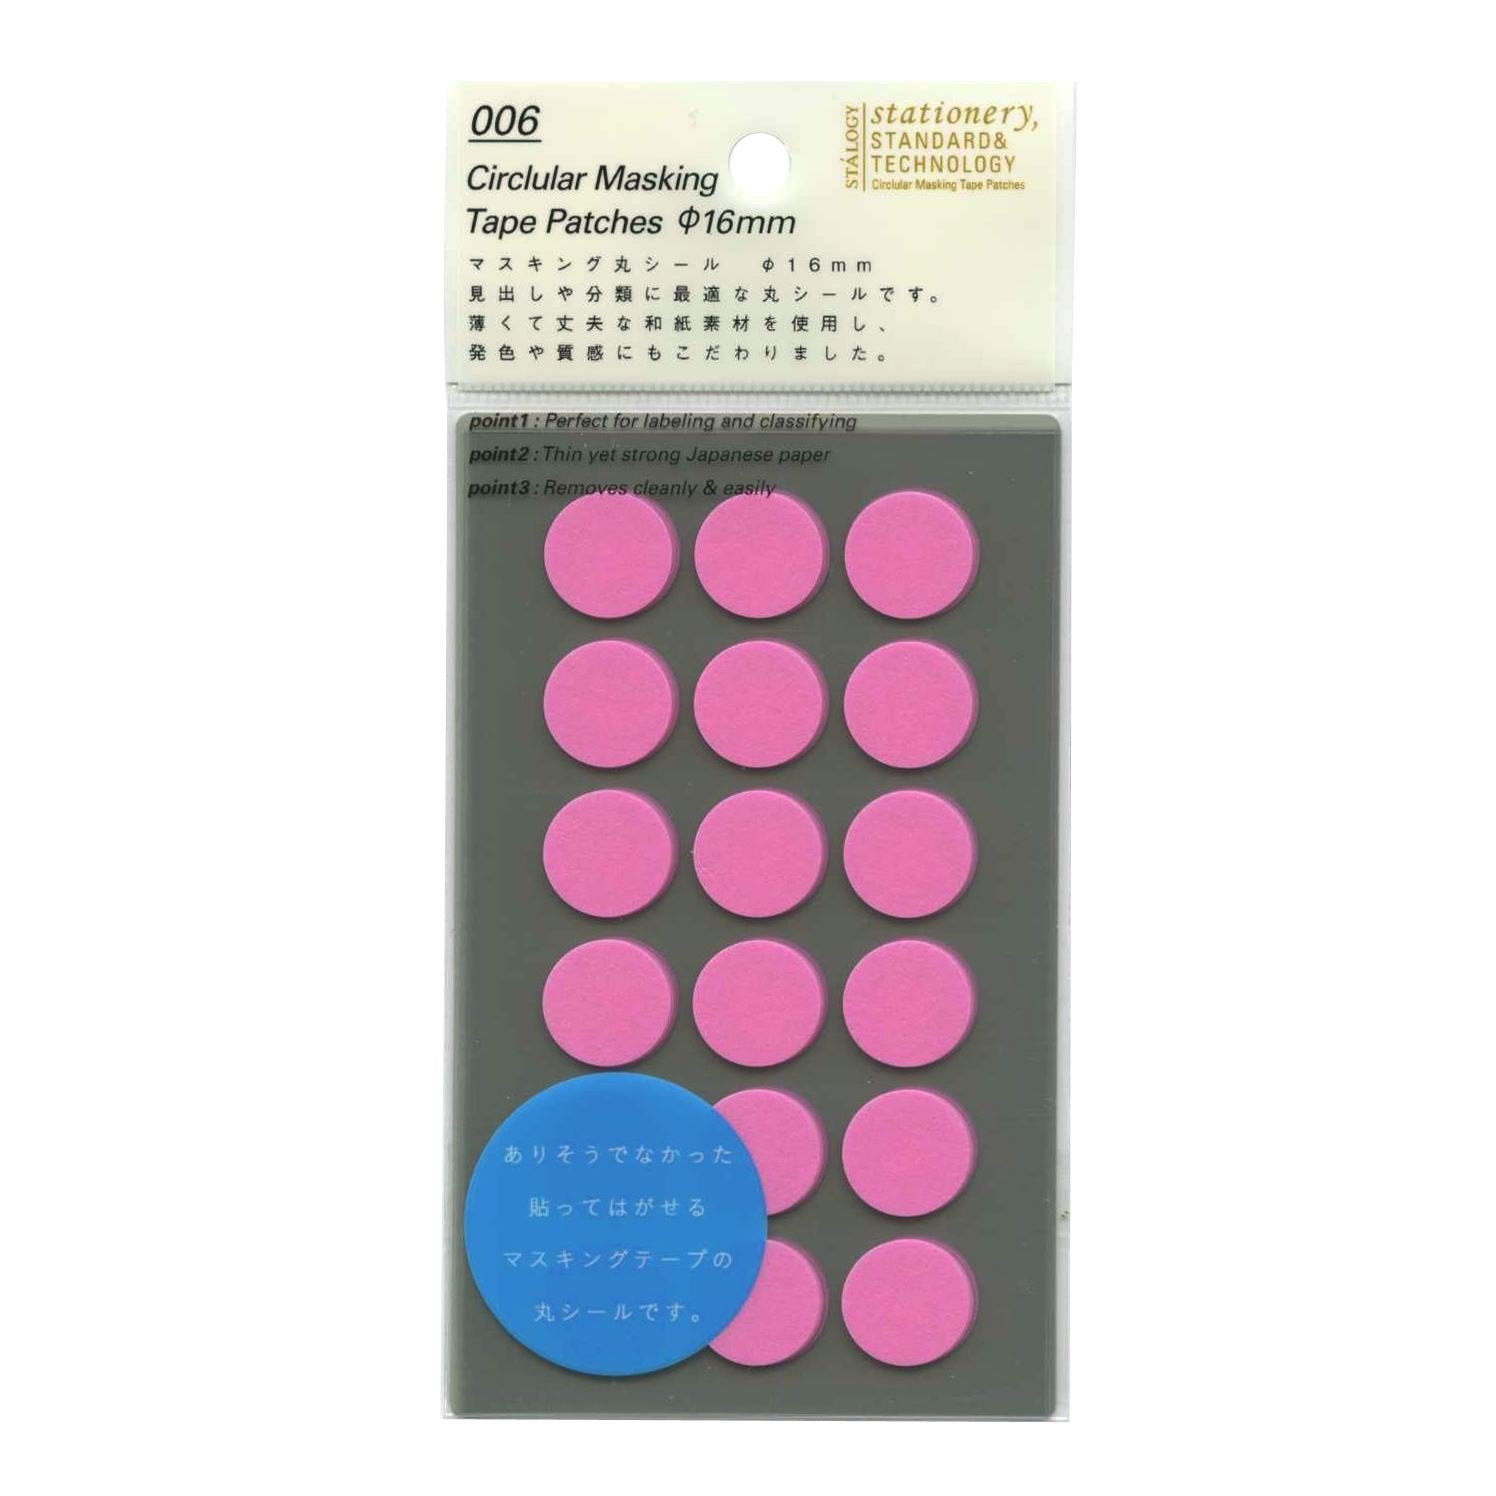 Light Pink Circular Masking Tape Patches. The circular masking patches are made from thin, yet strong Japanese paper, perfect for labelling and classifying. Durable Writeable.